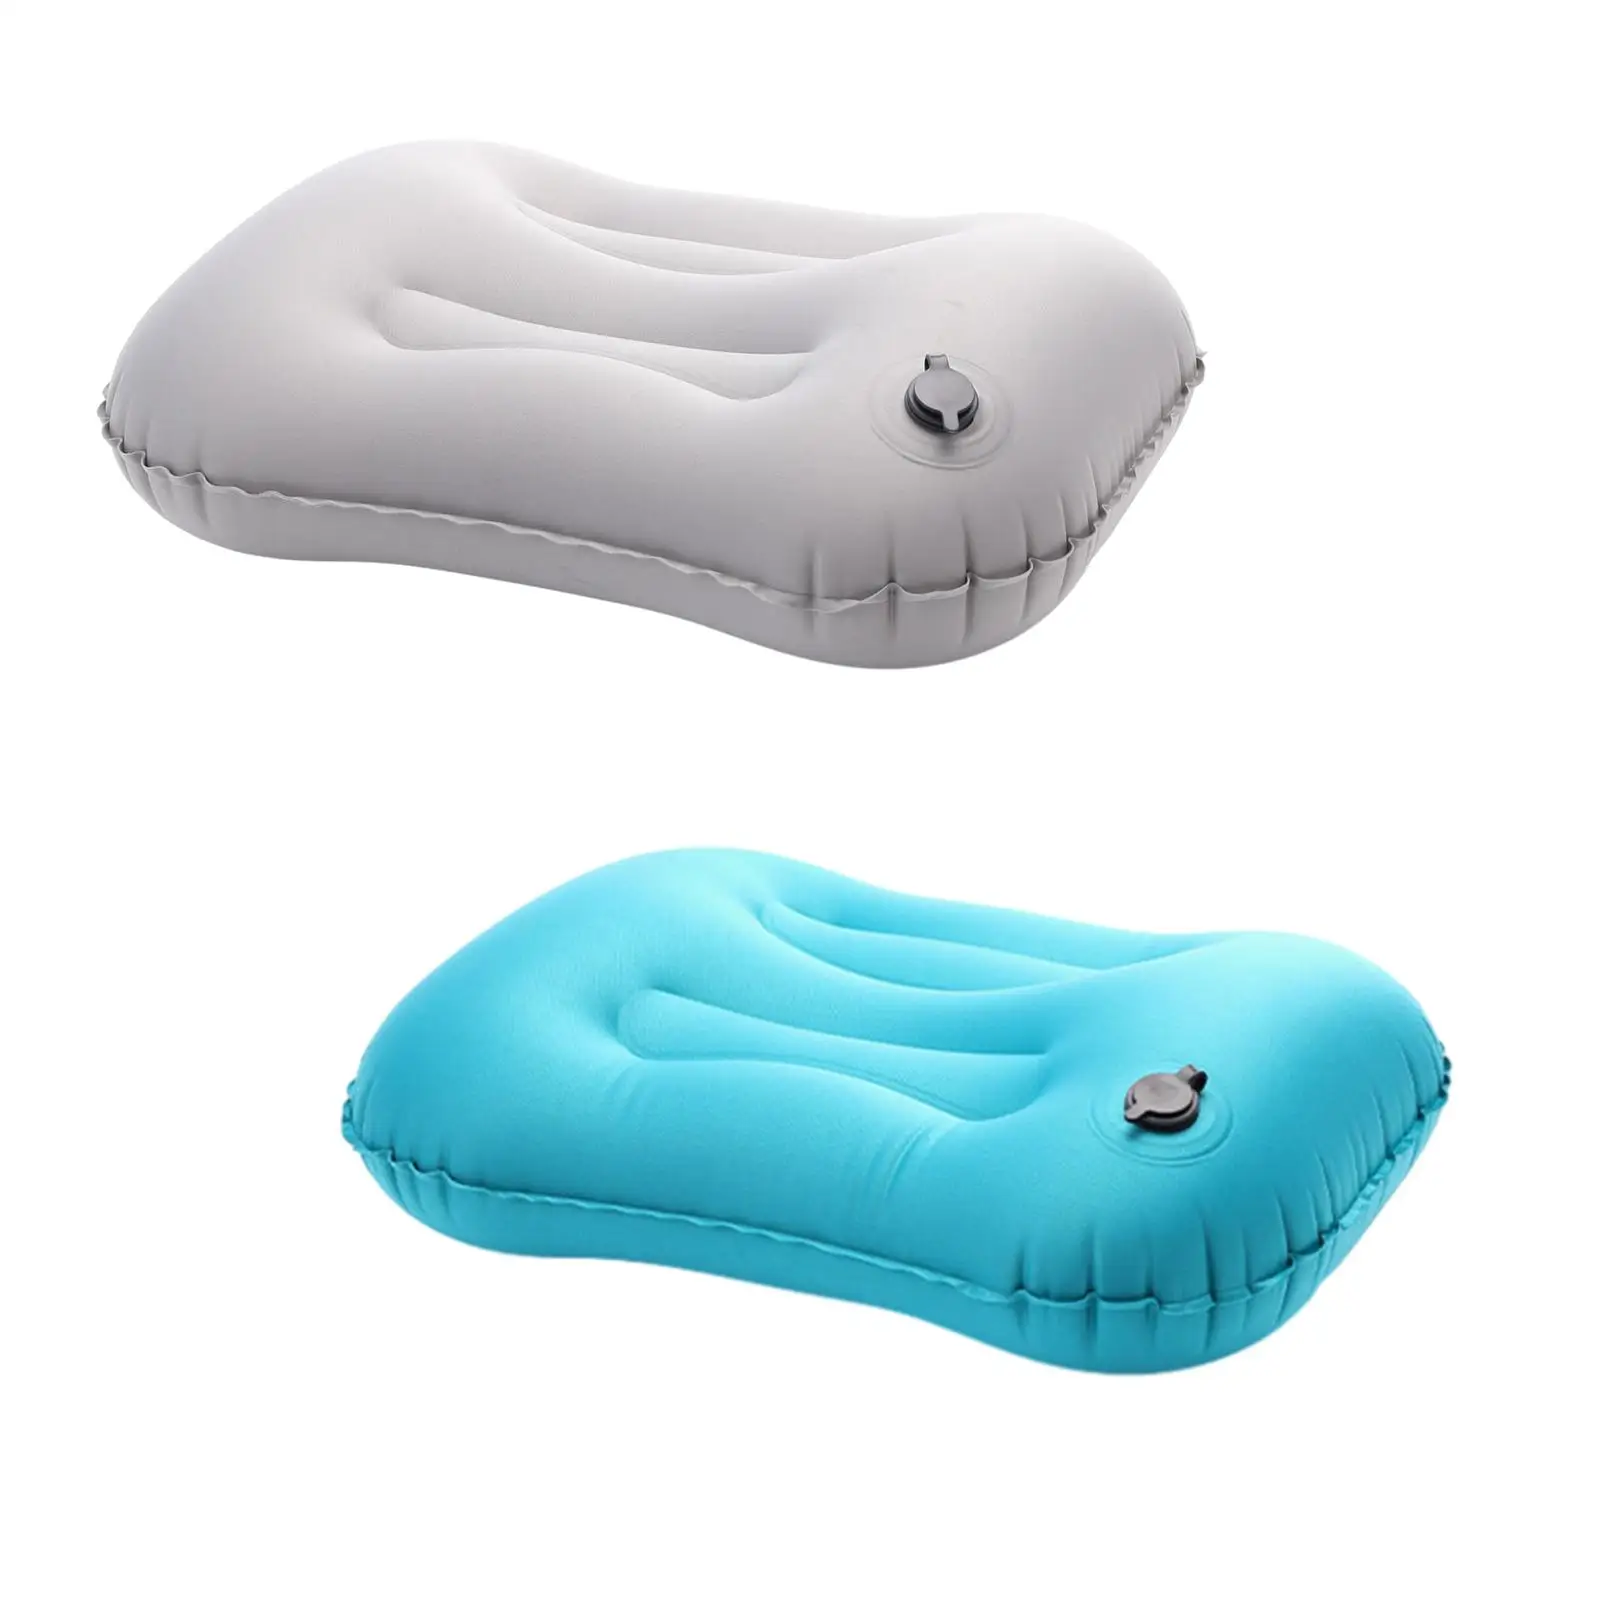 Inflatable Camping Pillow Portable for Neck Lumbar Support Blow up Air Pillow for Nap Rest Hiking Backpacking Hammock Traveling